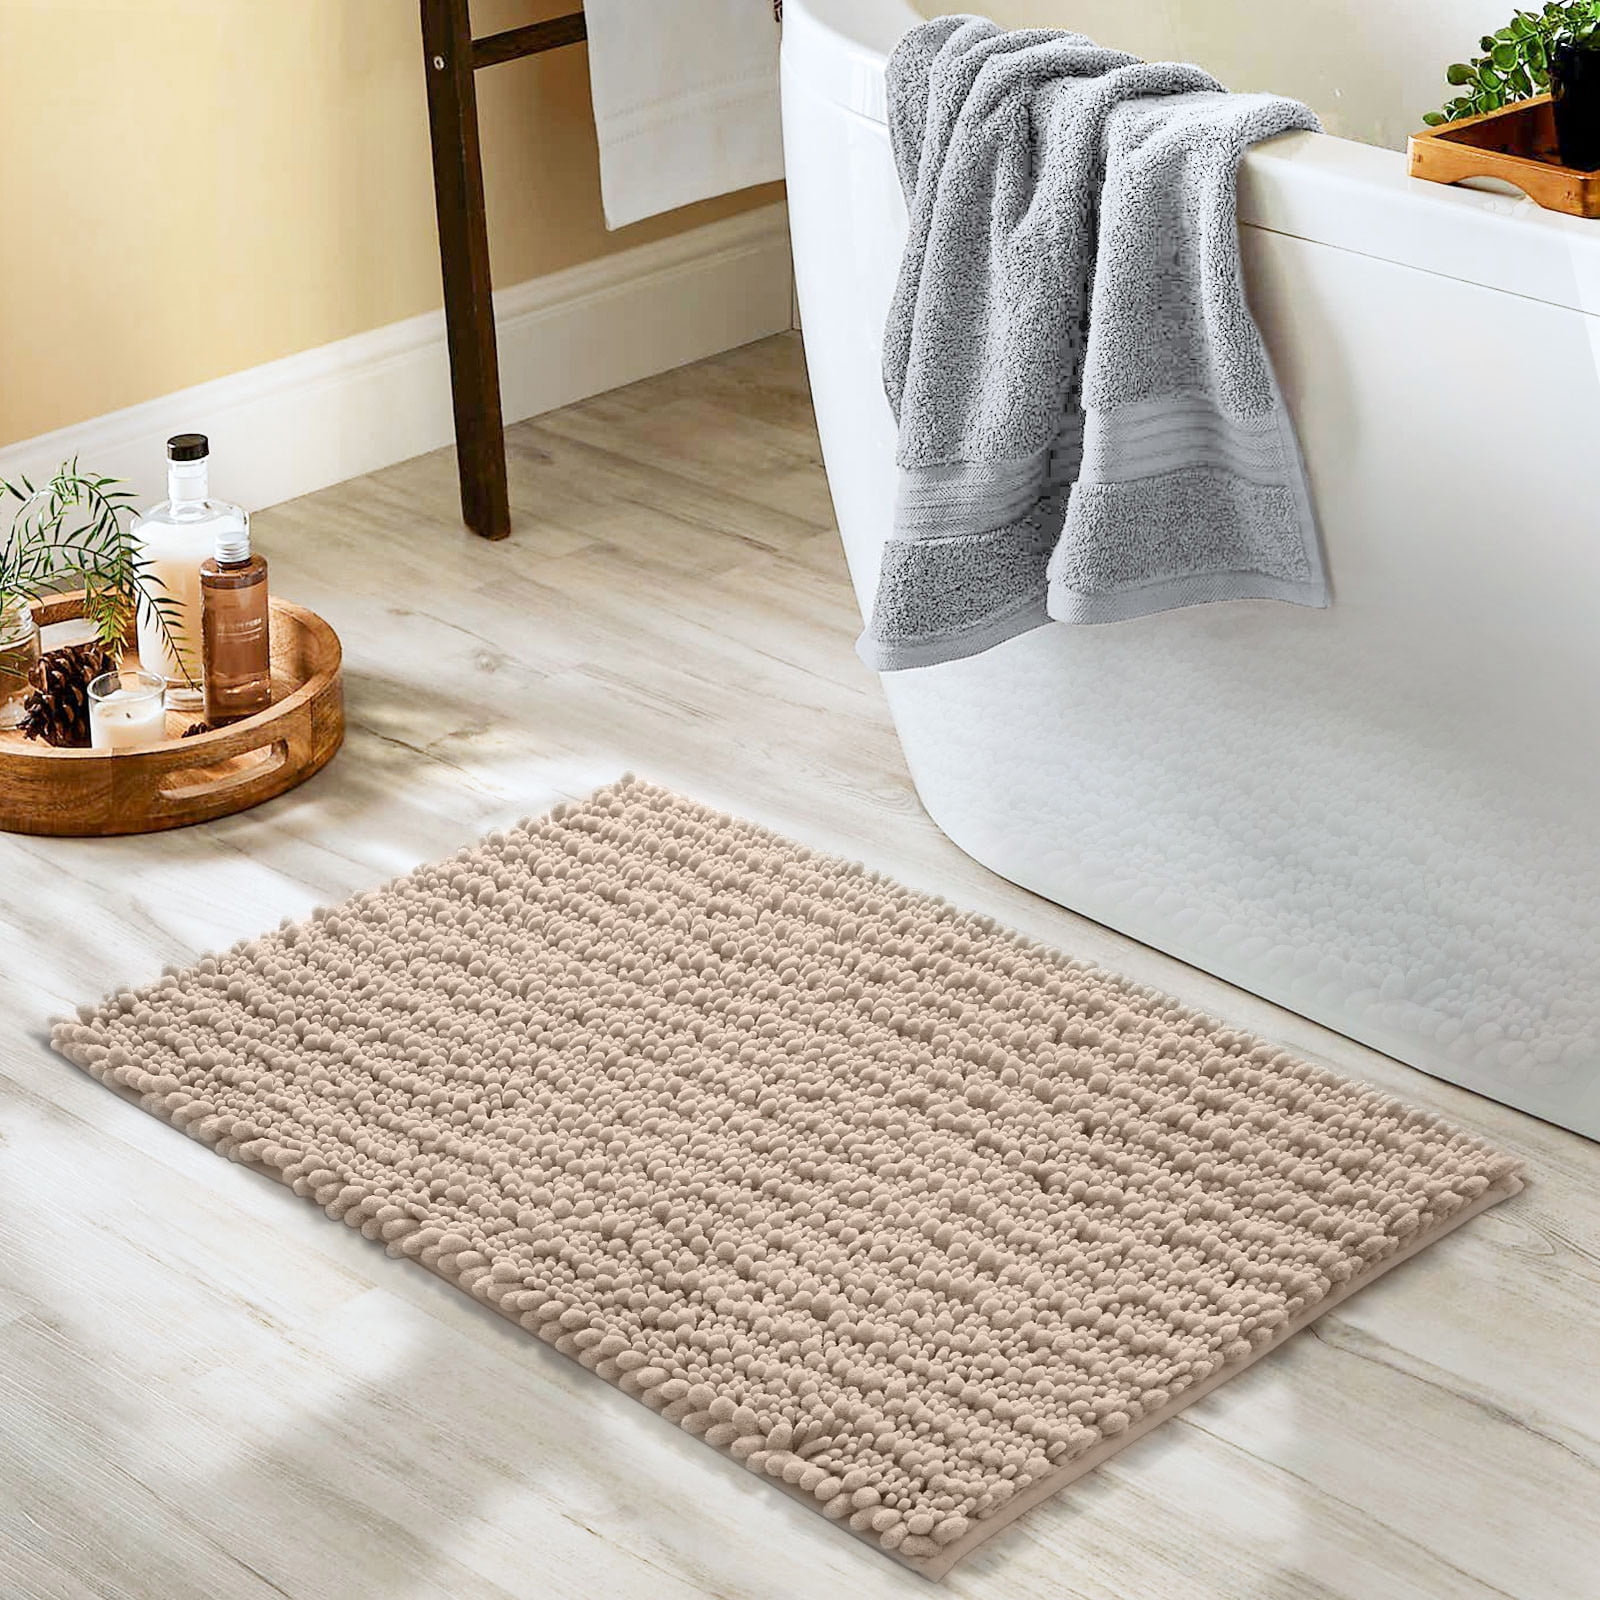 Get Naked Bath Mats Soft Absorb Water Anti Mold Rug Shower Non-slip Floor  Mat Bathroom Room Entryway Rugs Home Decor Accessories